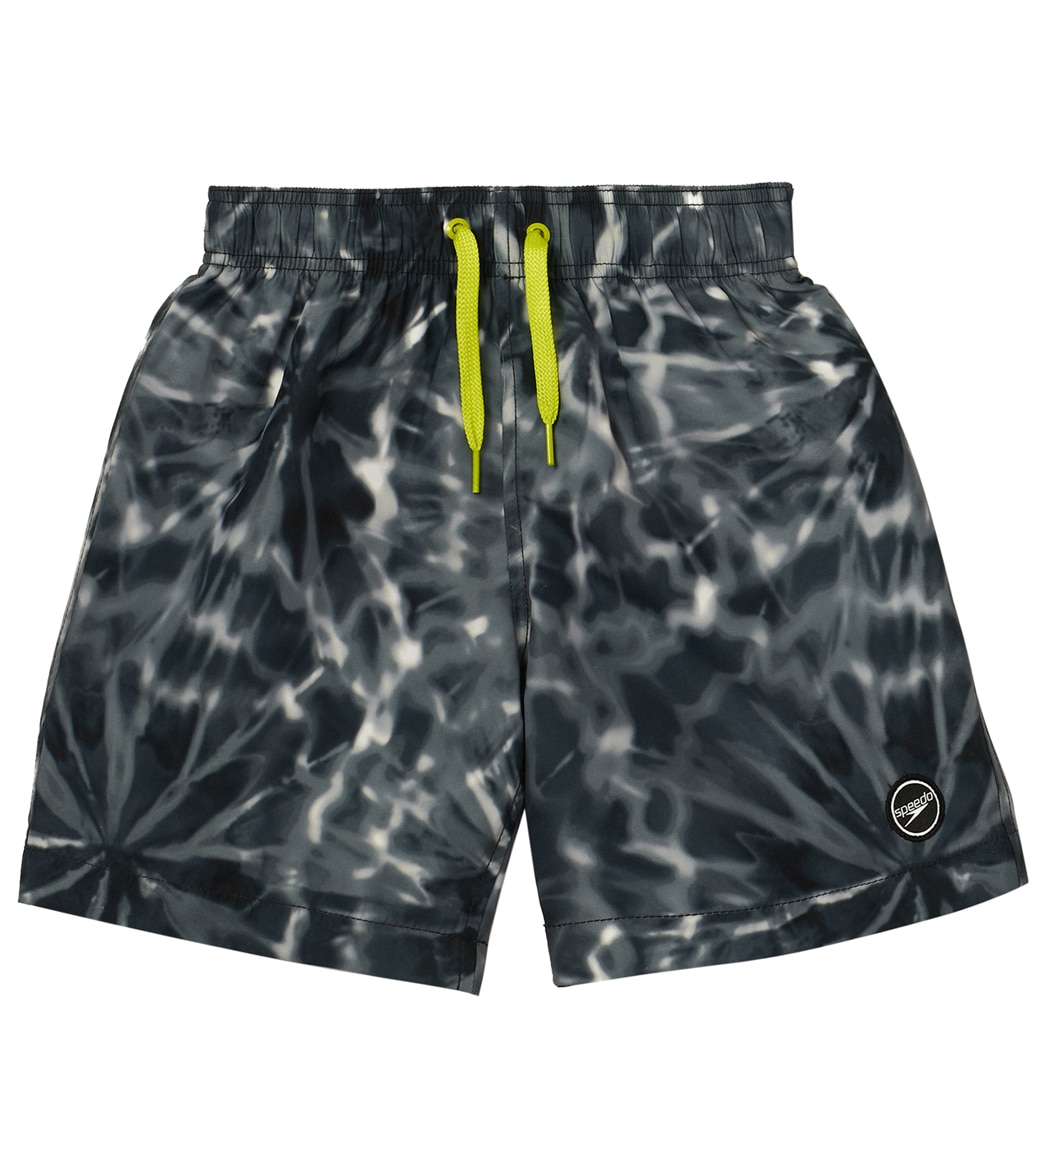 Speedo Boys' 15 Printed Volley Shorts - Anthracite X-Small - Swimoutlet.com